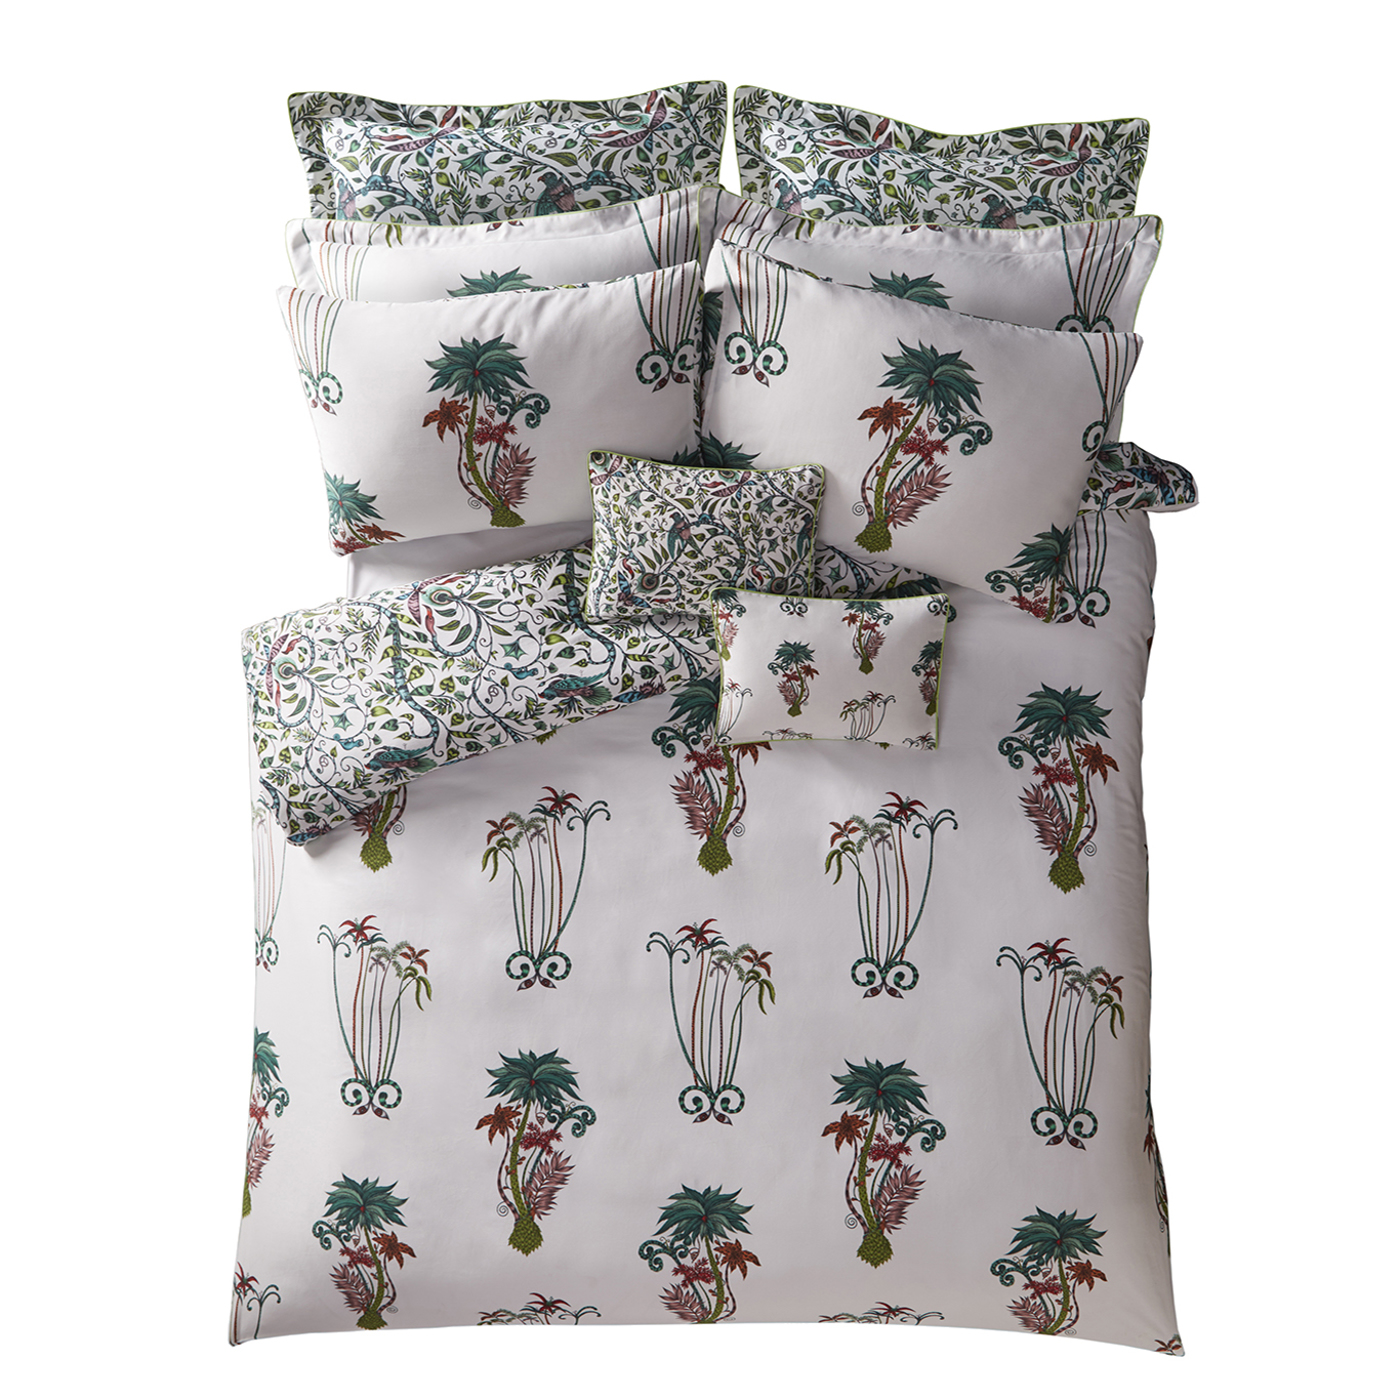 Jungle Palms 50X75 Oxford Piped Pillowcase White Bedding by CNC